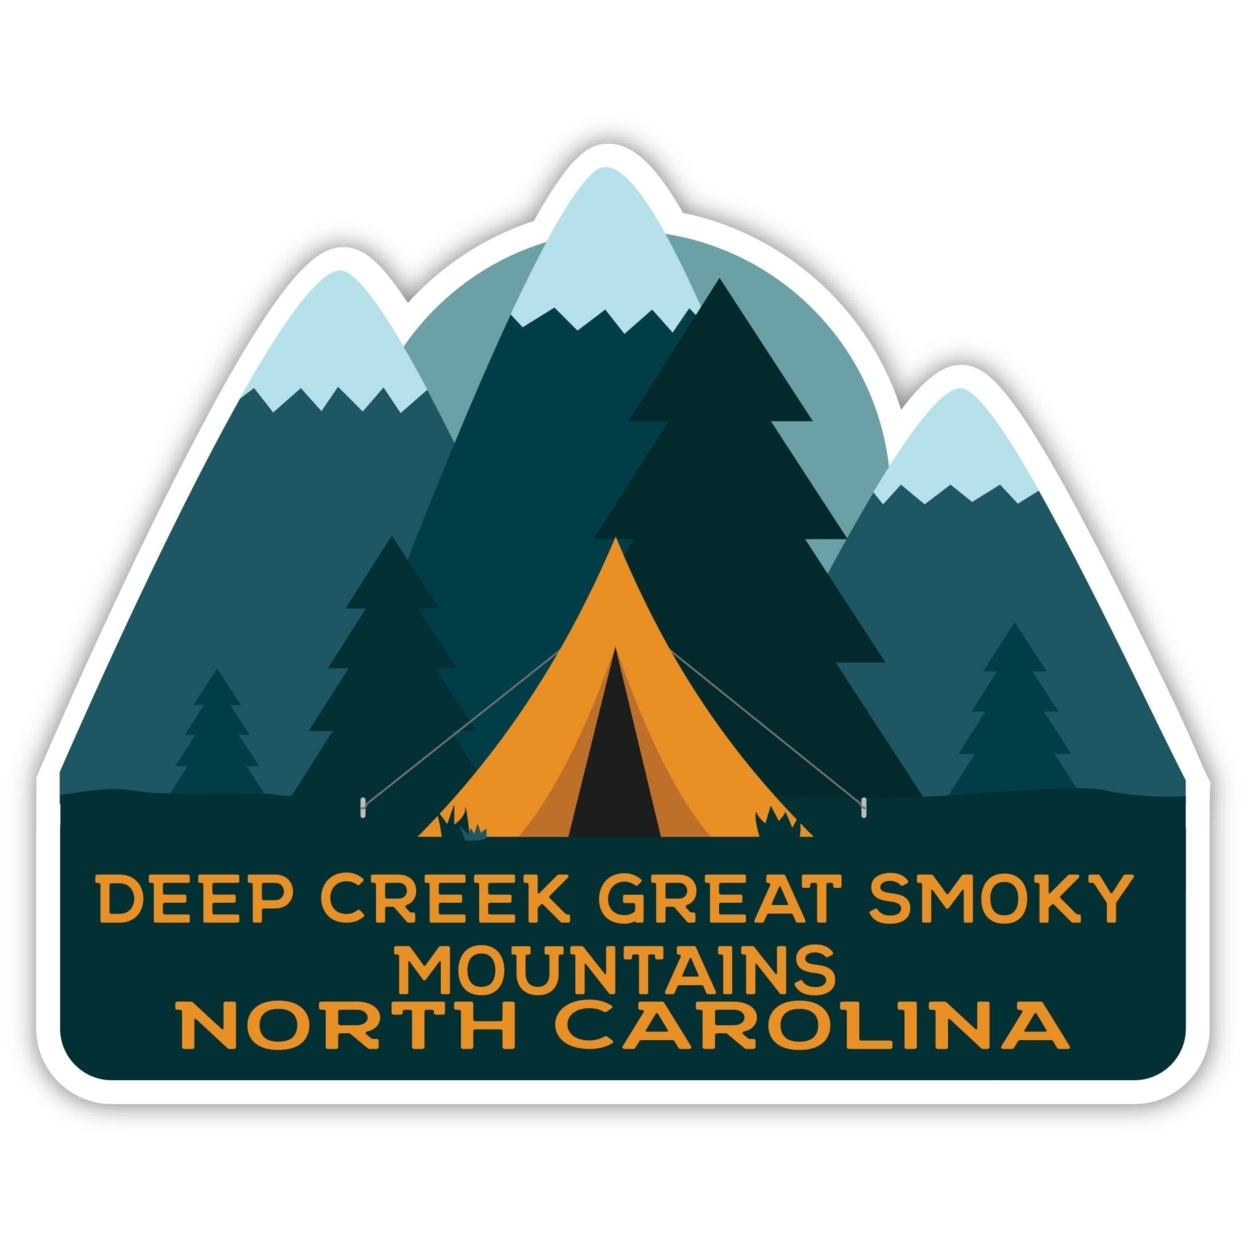 Deep Creek Great Smoky Mountains North Carolina Souvenir Decorative Stickers (Choose Theme And Size) - 4-Pack, 2-Inch, Tent